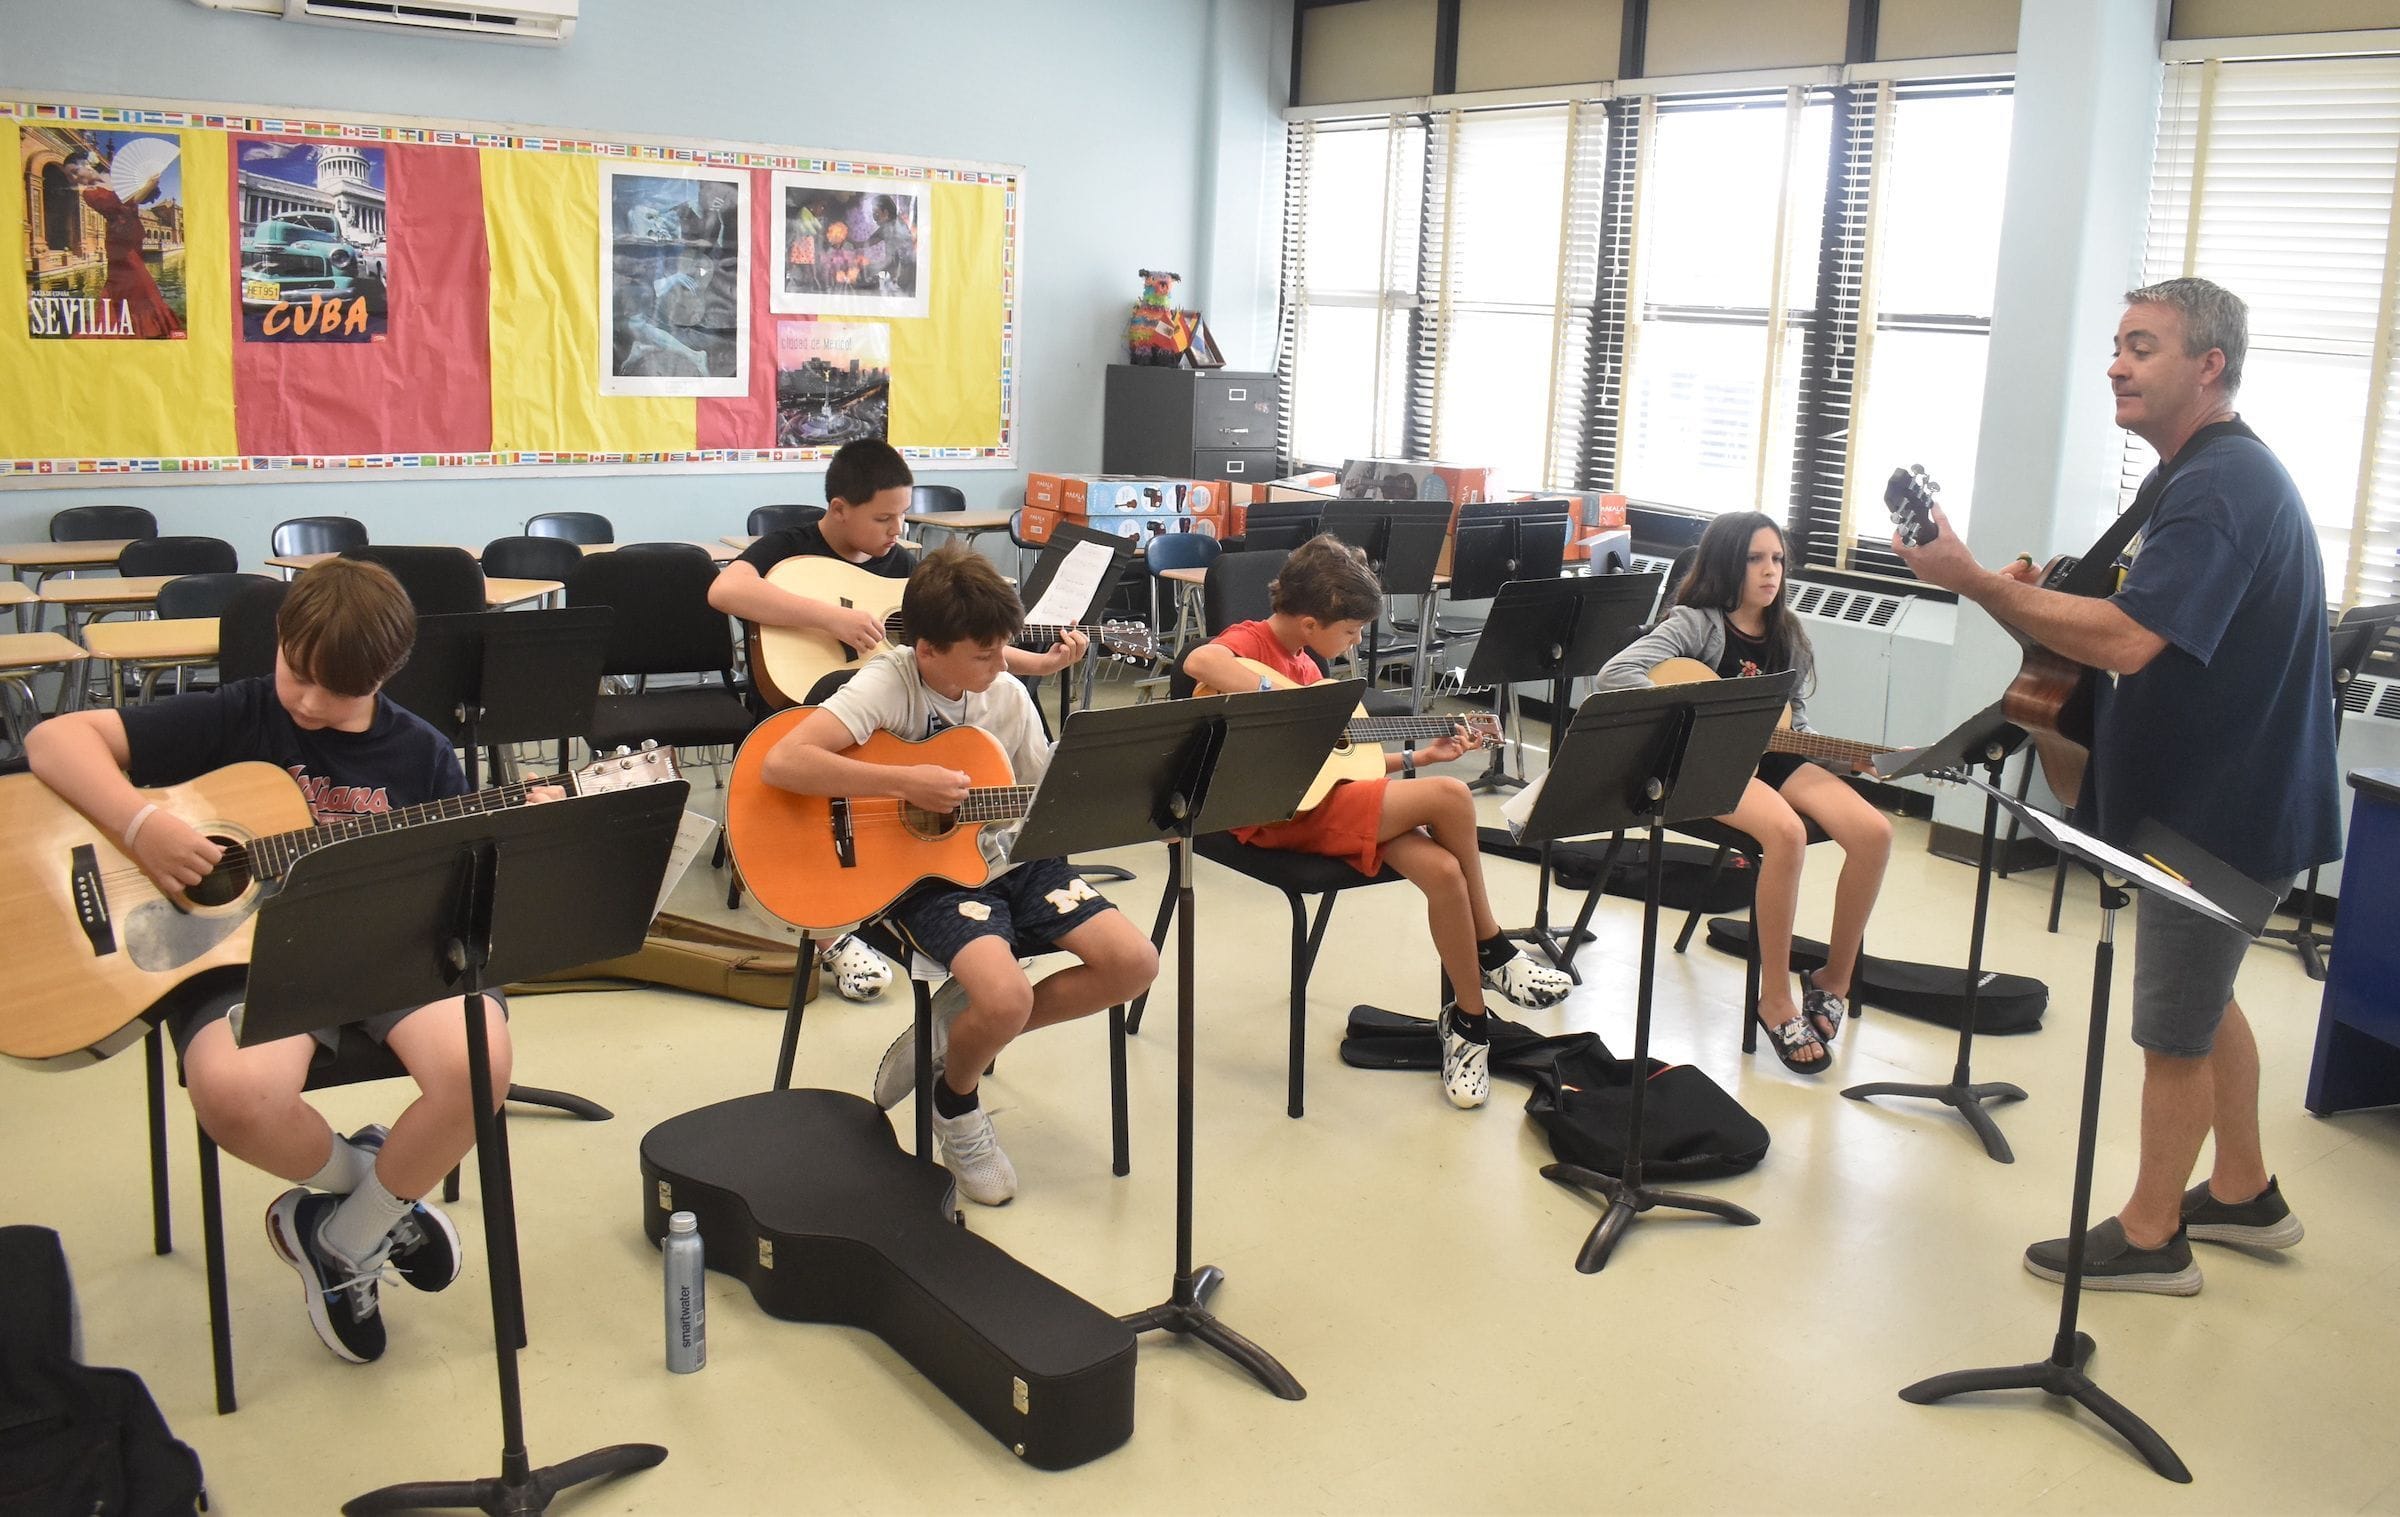 Painting Performance And Much More At Massapequa Arts Camp